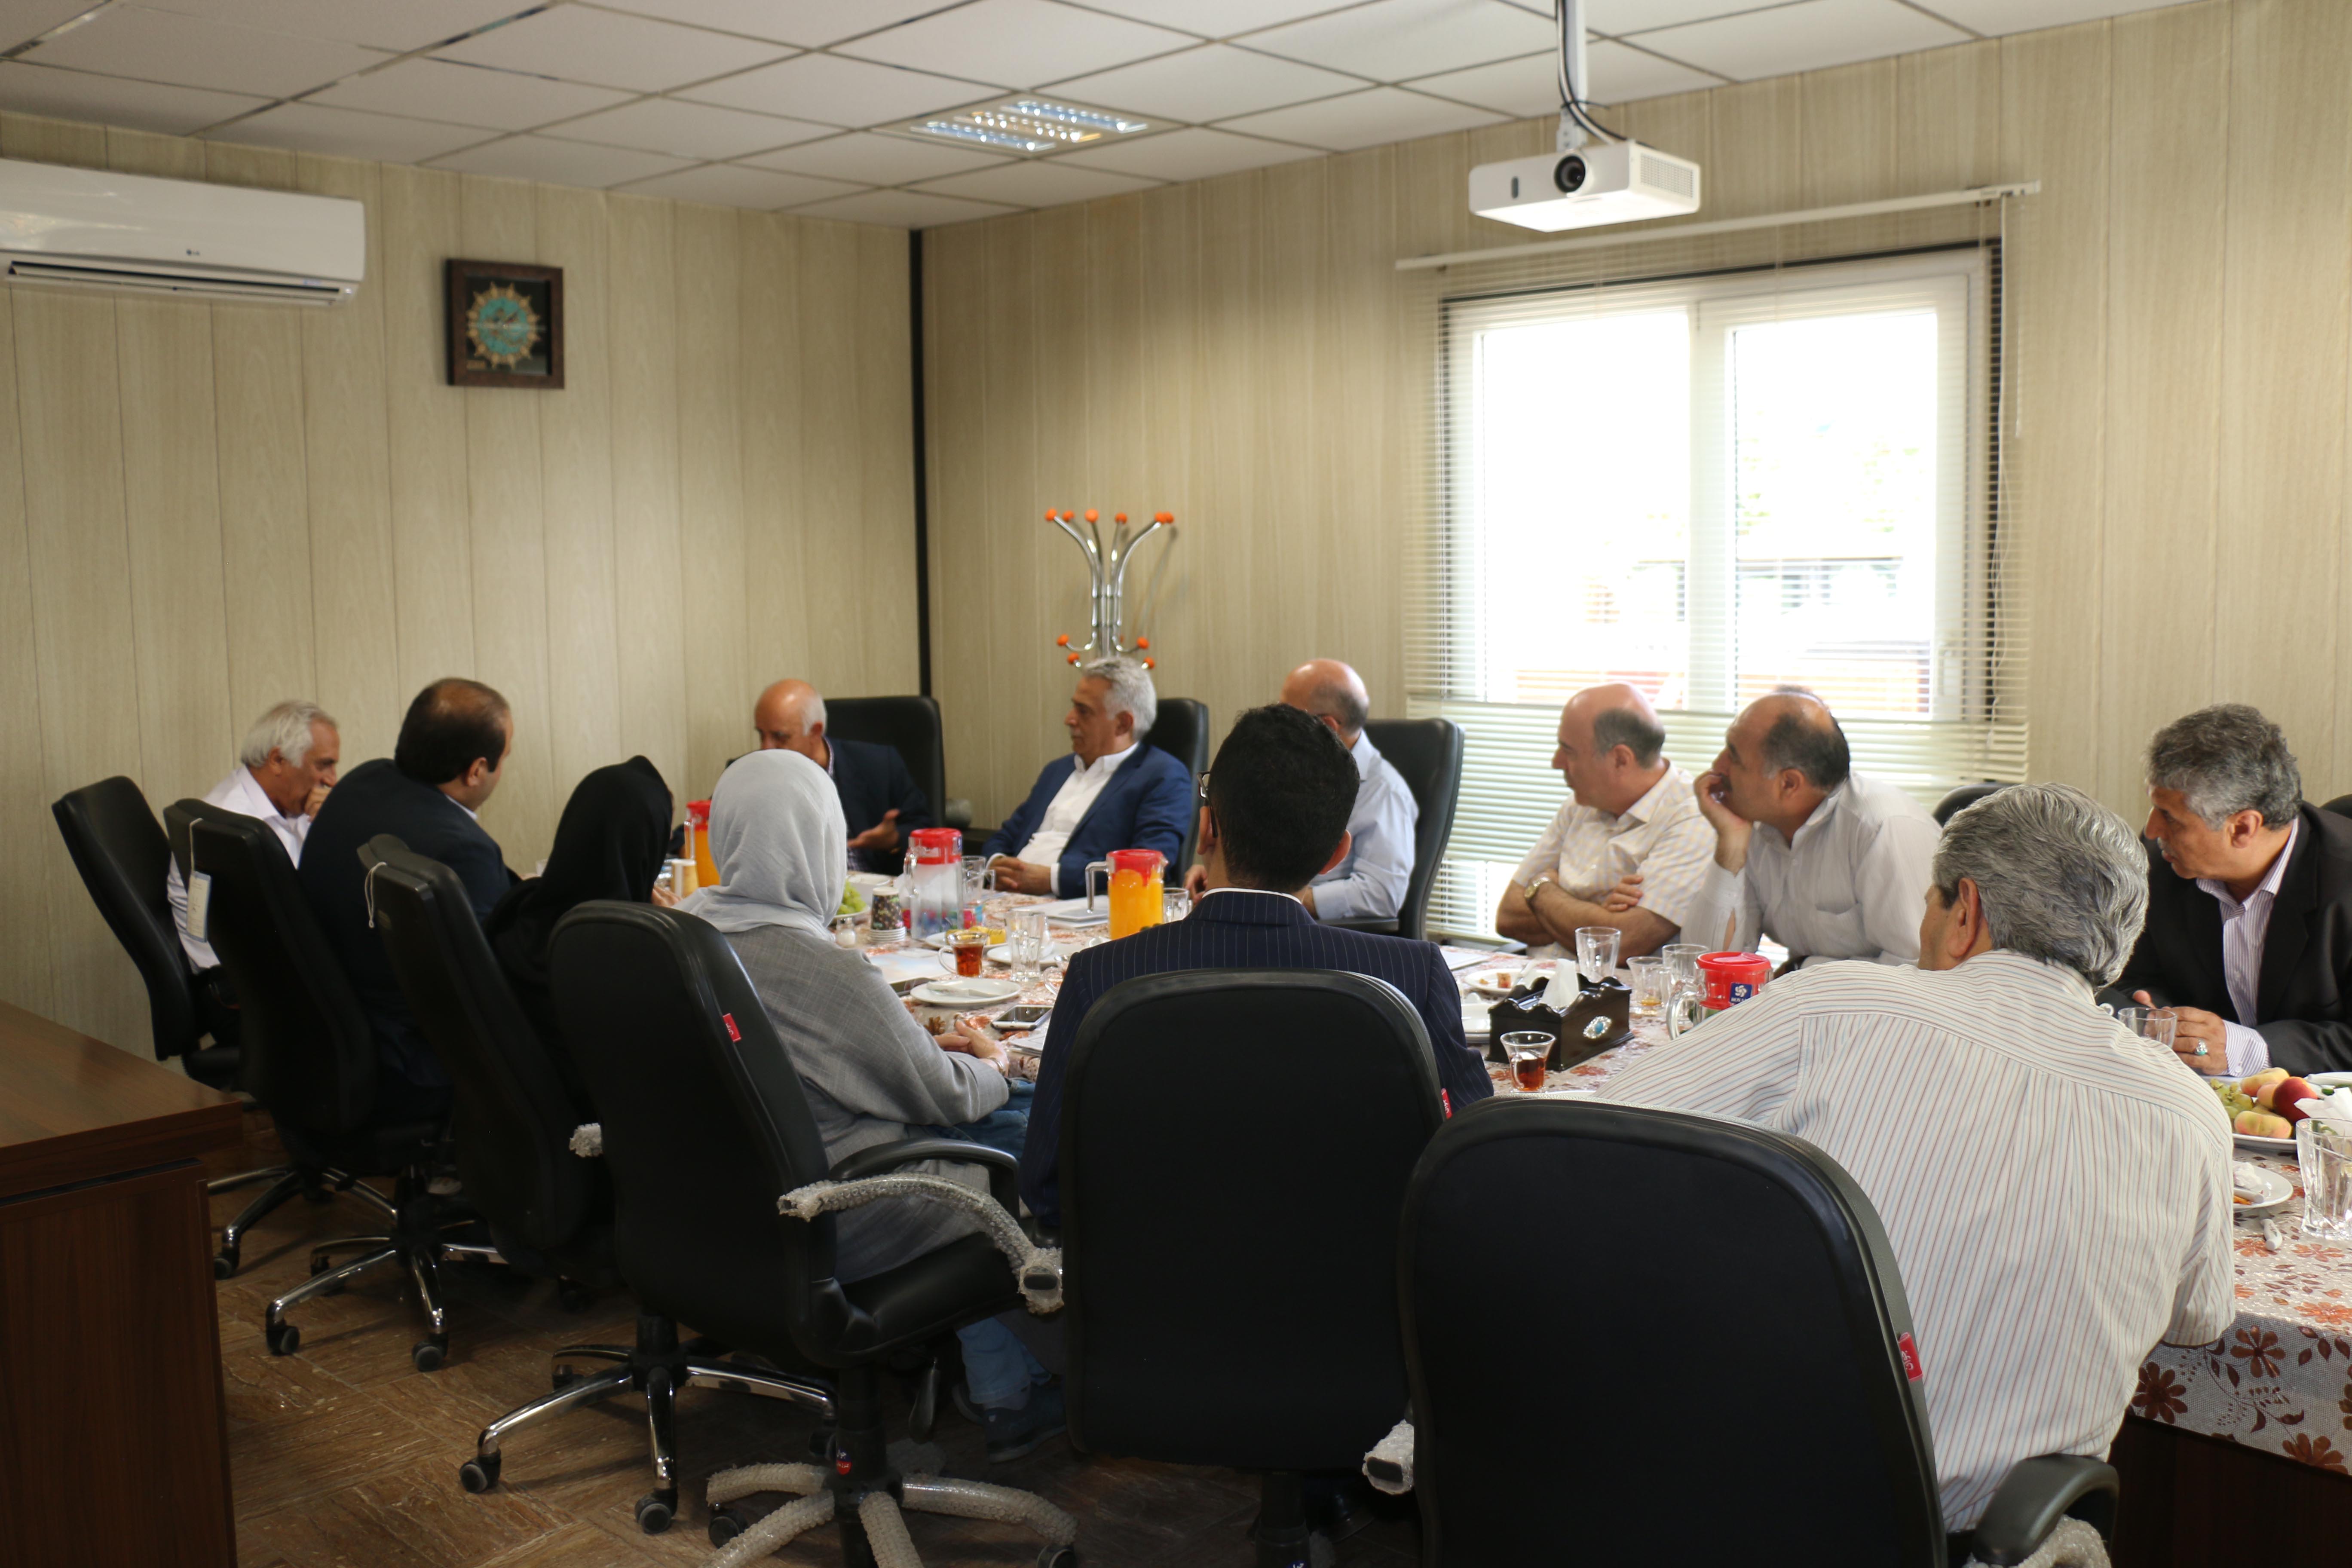 Iran mine house's board of directors have closely visited Delta Rah Machine products, technical and management skills